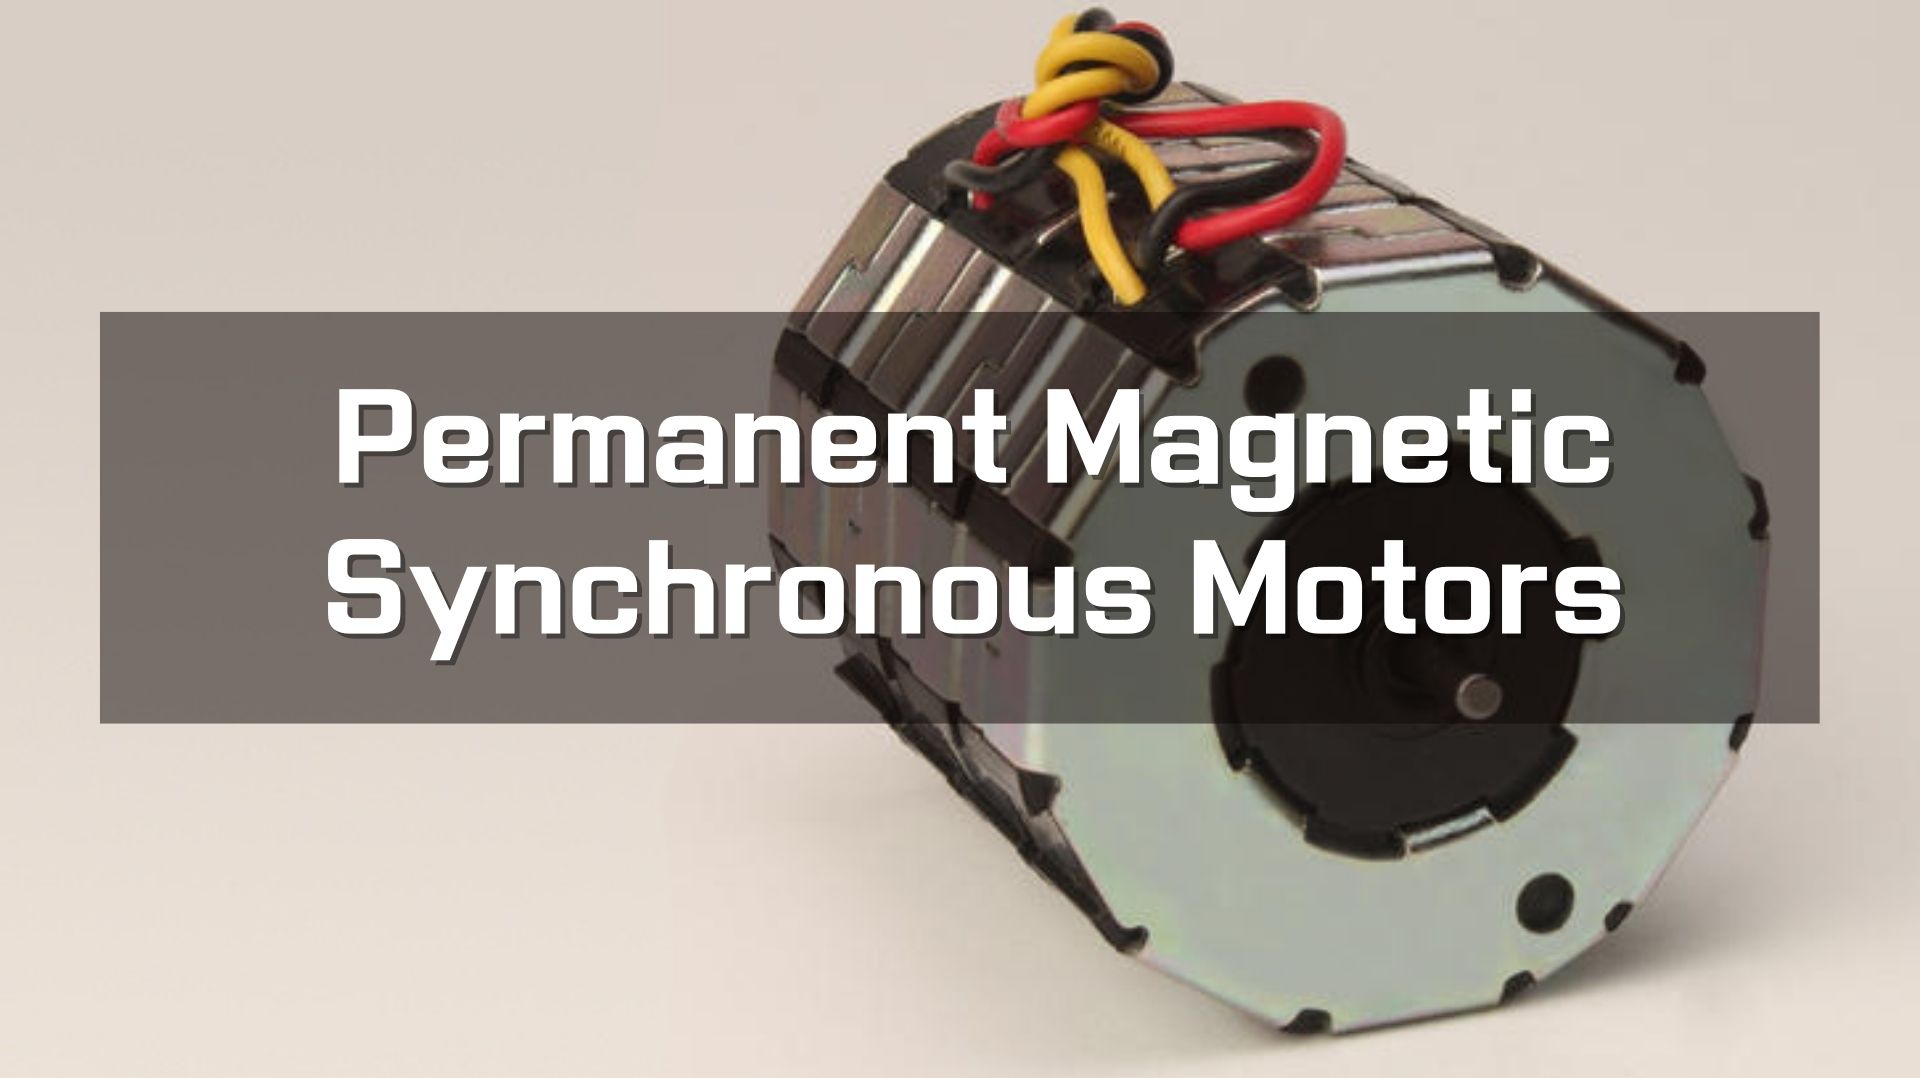 A Guide To The Best Permanent Magnet Motors In 22-23